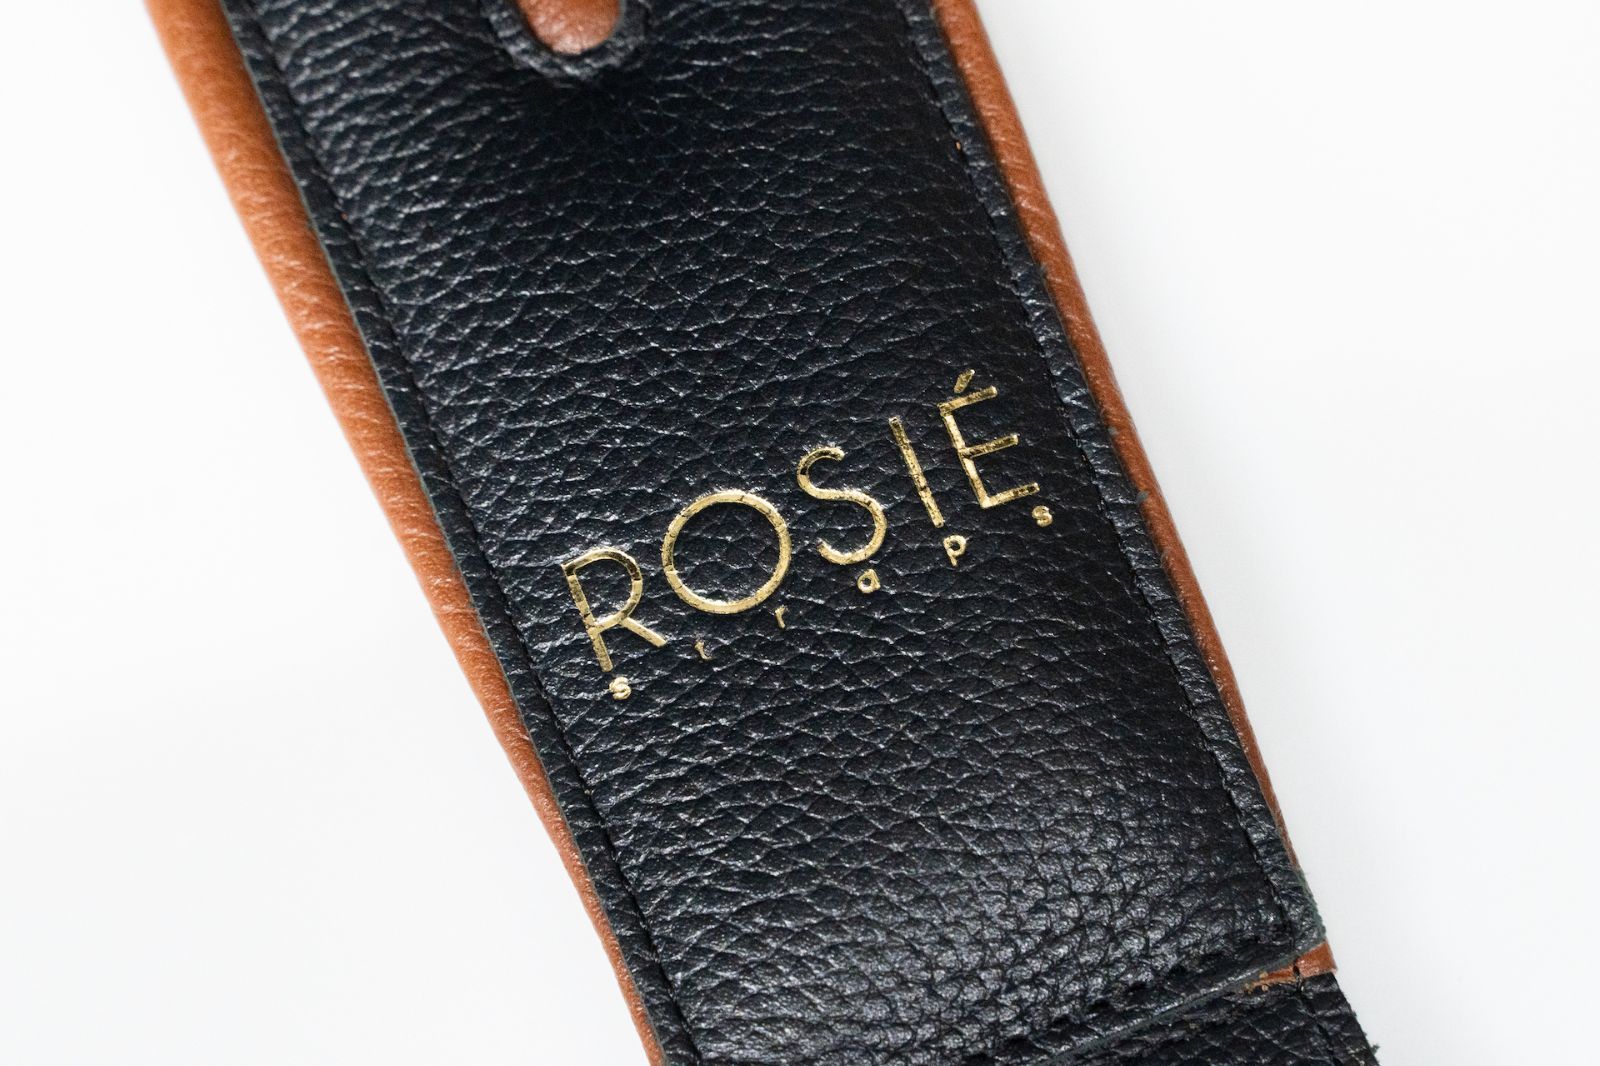 new】ROSIÉ / ROSIE straps Black with Brown Details 2.5inch 【横浜